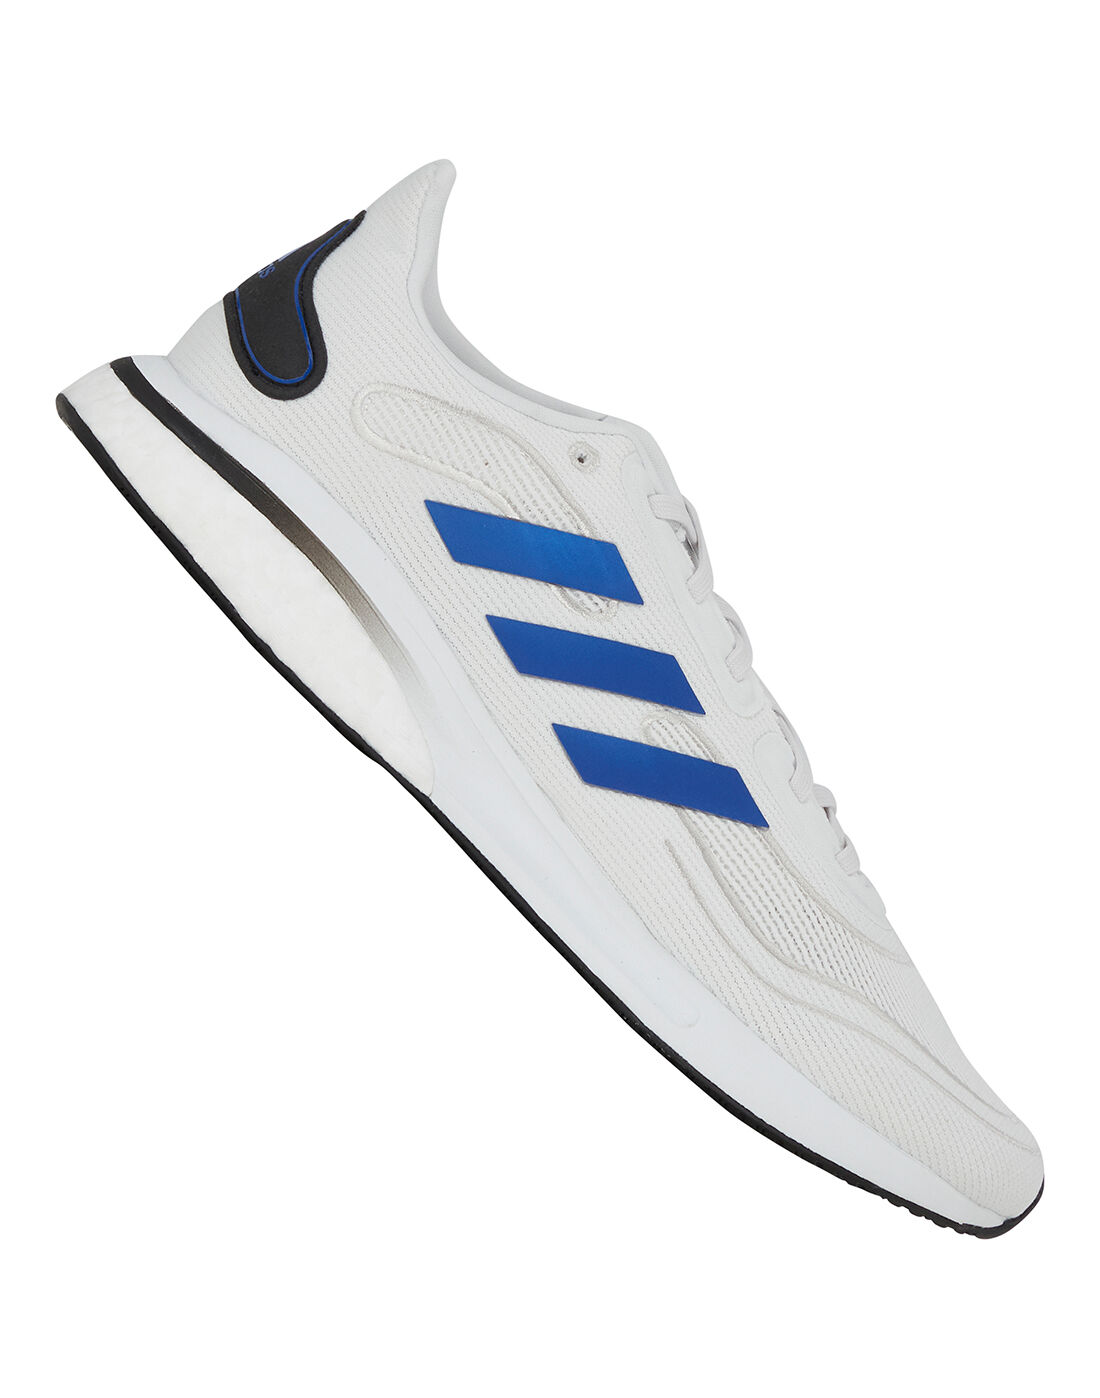 slip on adidas pria sandals shoes outlet mall | White - adidas Mens  Supernova - adidas borbomix sneakers clearance outlet IE